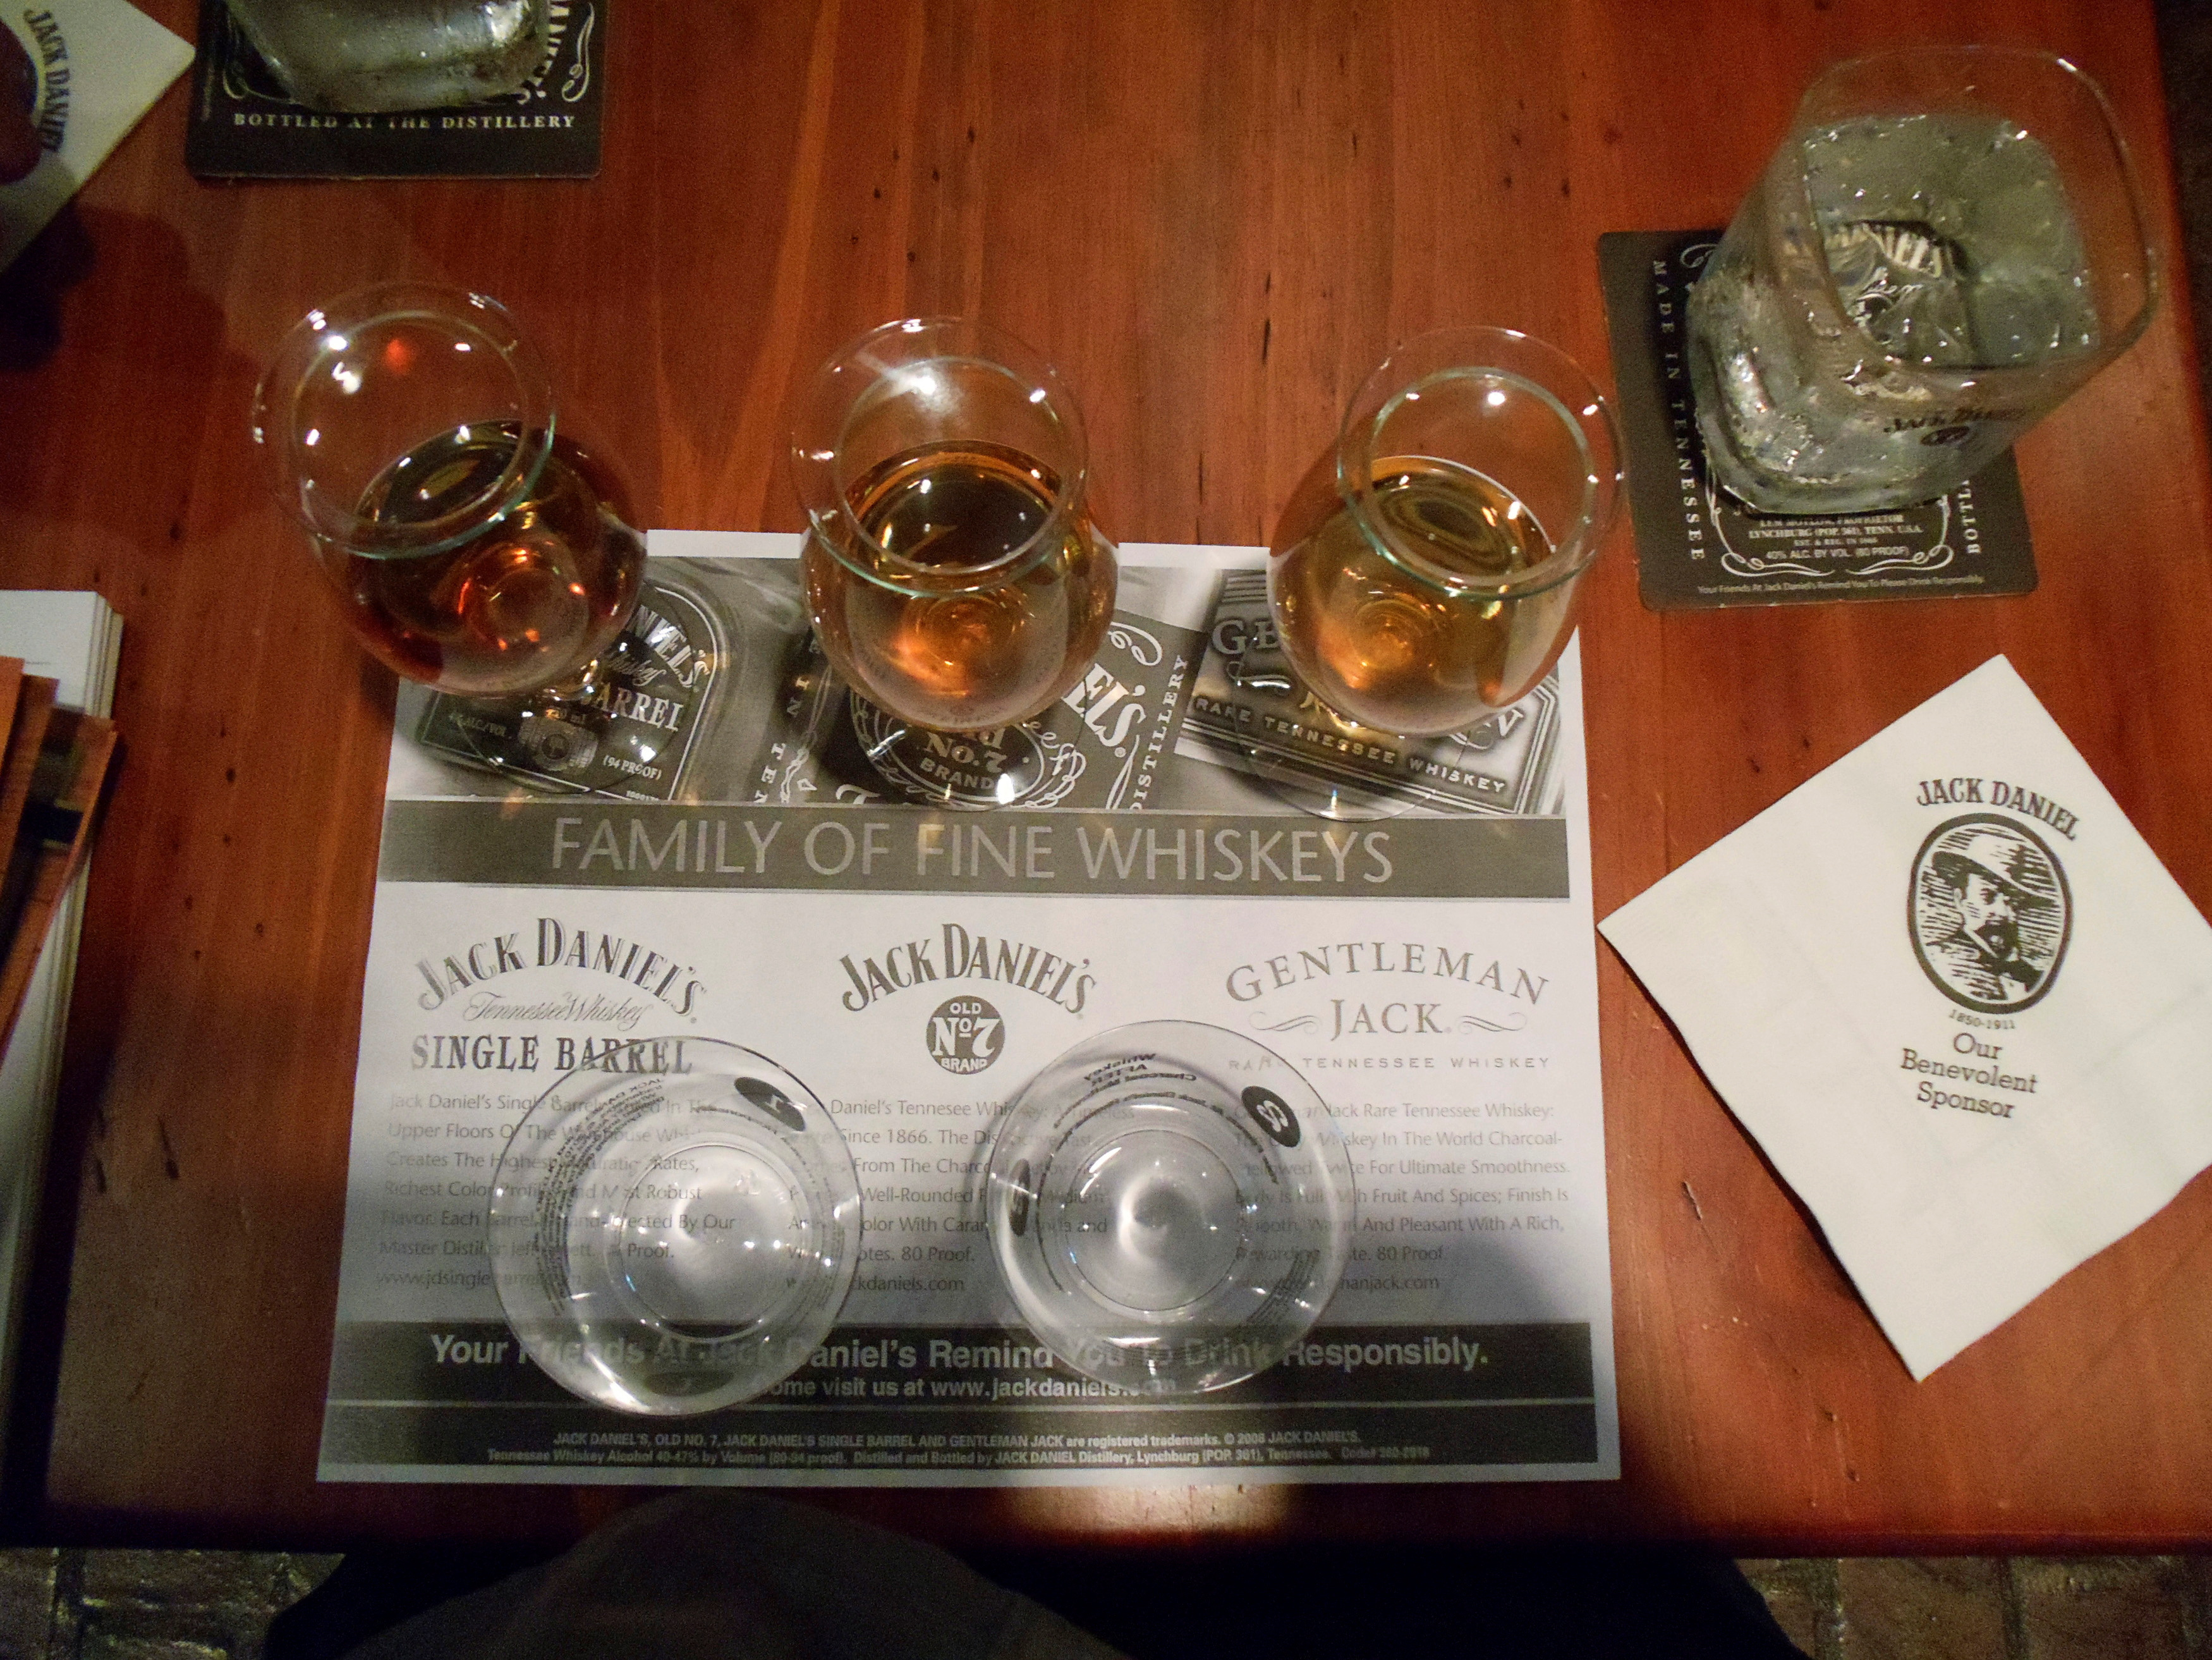 A Whiskey tasting station is seen at the Jack Daniel's distillery in Lynchburg, Tennessee